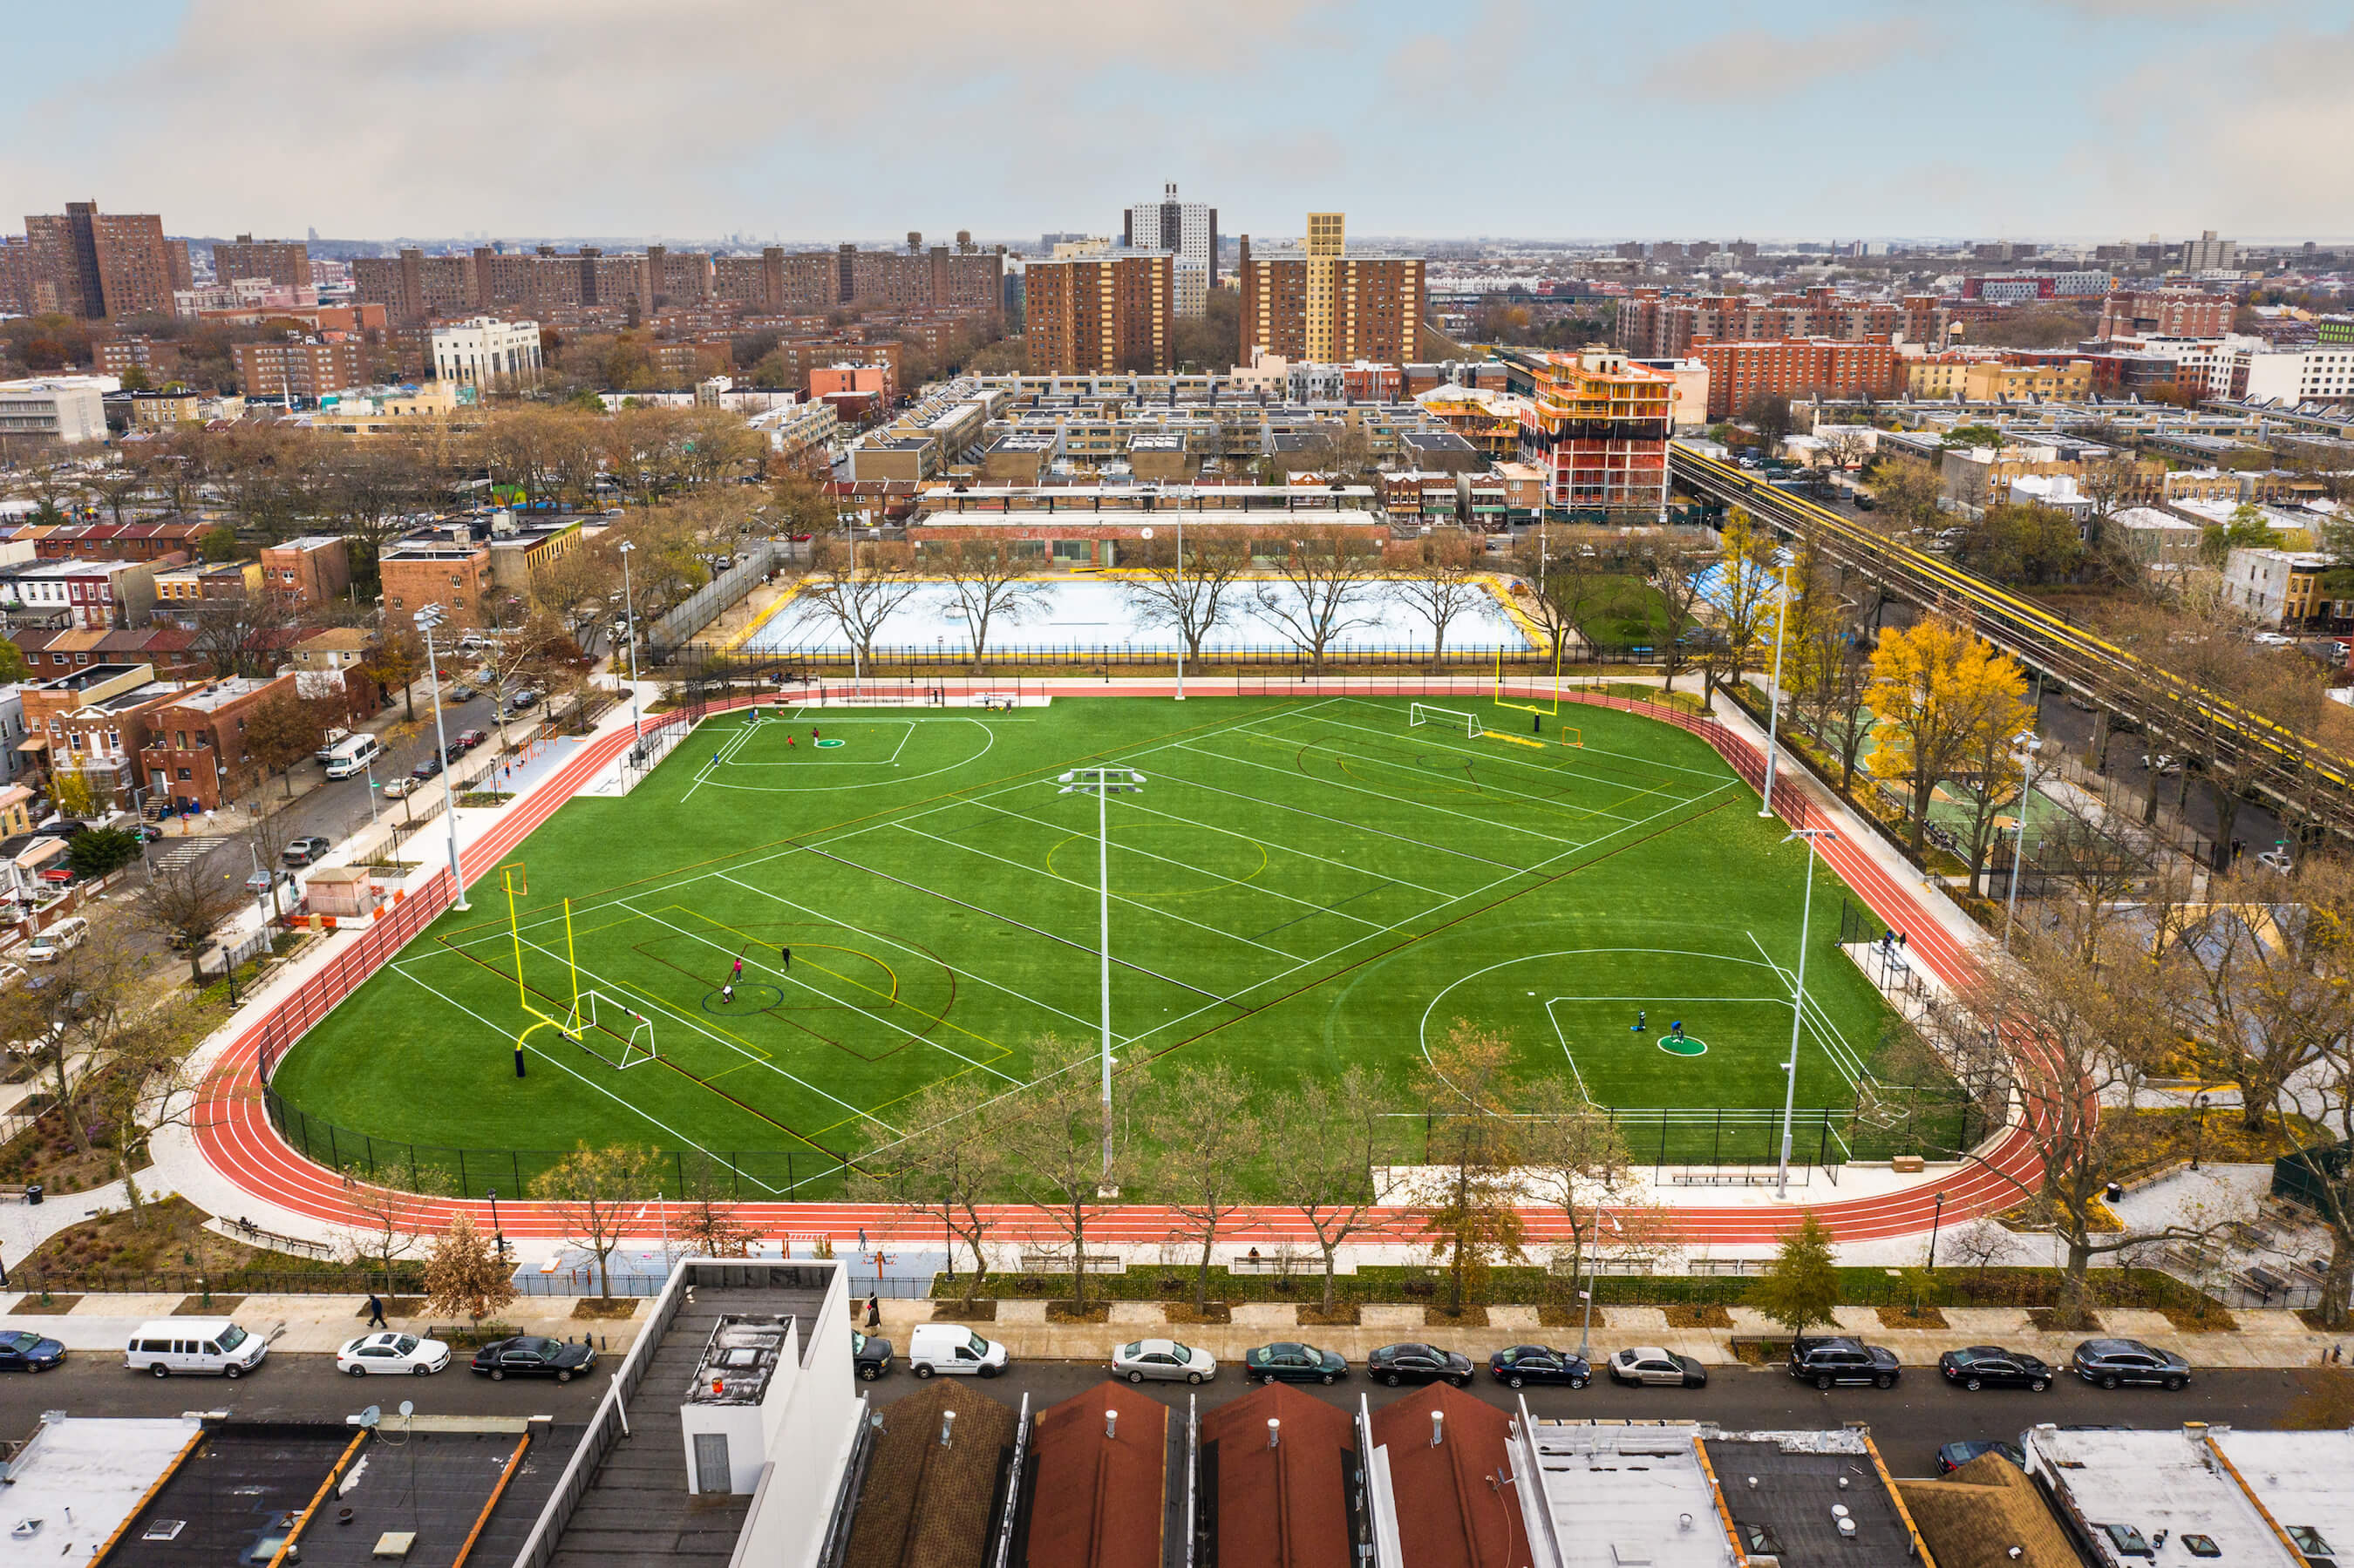 aerial view of a large turf playing field in a city, betsy head park